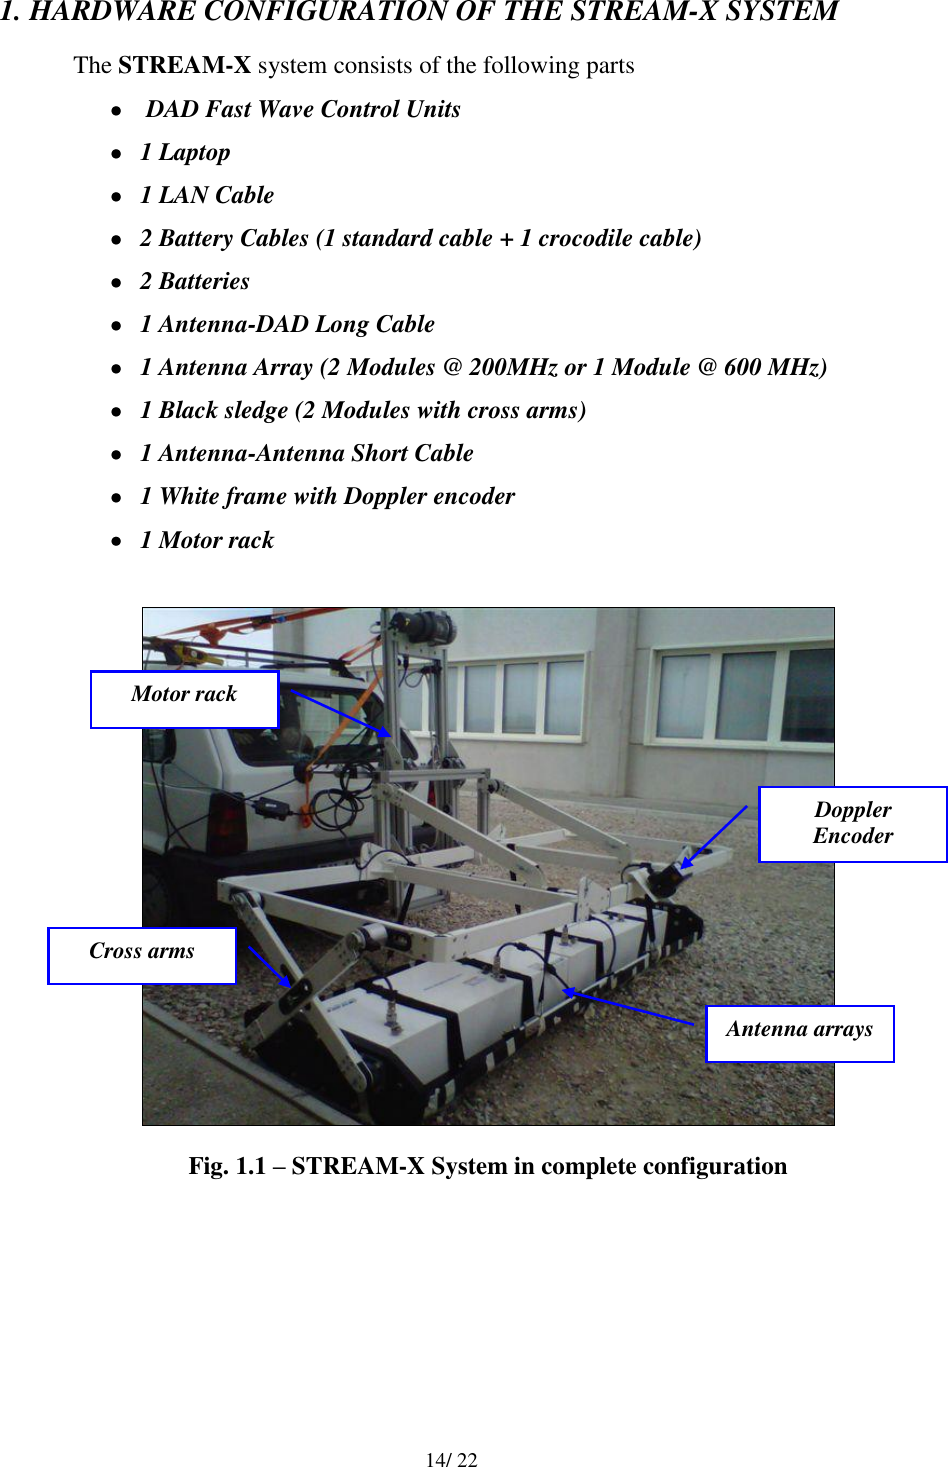   14/ 22 1. HARDWARE CONFIGURATION OF THE STREAM-X SYSTEM The STREAM-X system consists of the following parts    DAD Fast Wave Control Units  1 Laptop   1 LAN Cable  2 Battery Cables (1 standard cable + 1 crocodile cable)  2 Batteries  1 Antenna-DAD Long Cable  1 Antenna Array (2 Modules @ 200MHz or 1 Module @ 600 MHz)  1 Black sledge (2 Modules with cross arms)  1 Antenna-Antenna Short Cable  1 White frame with Doppler encoder  1 Motor rack    Fig. 1.1 – STREAM-X System in complete configuration     Motor rack Doppler Encoder Cross arms Antenna arrays 